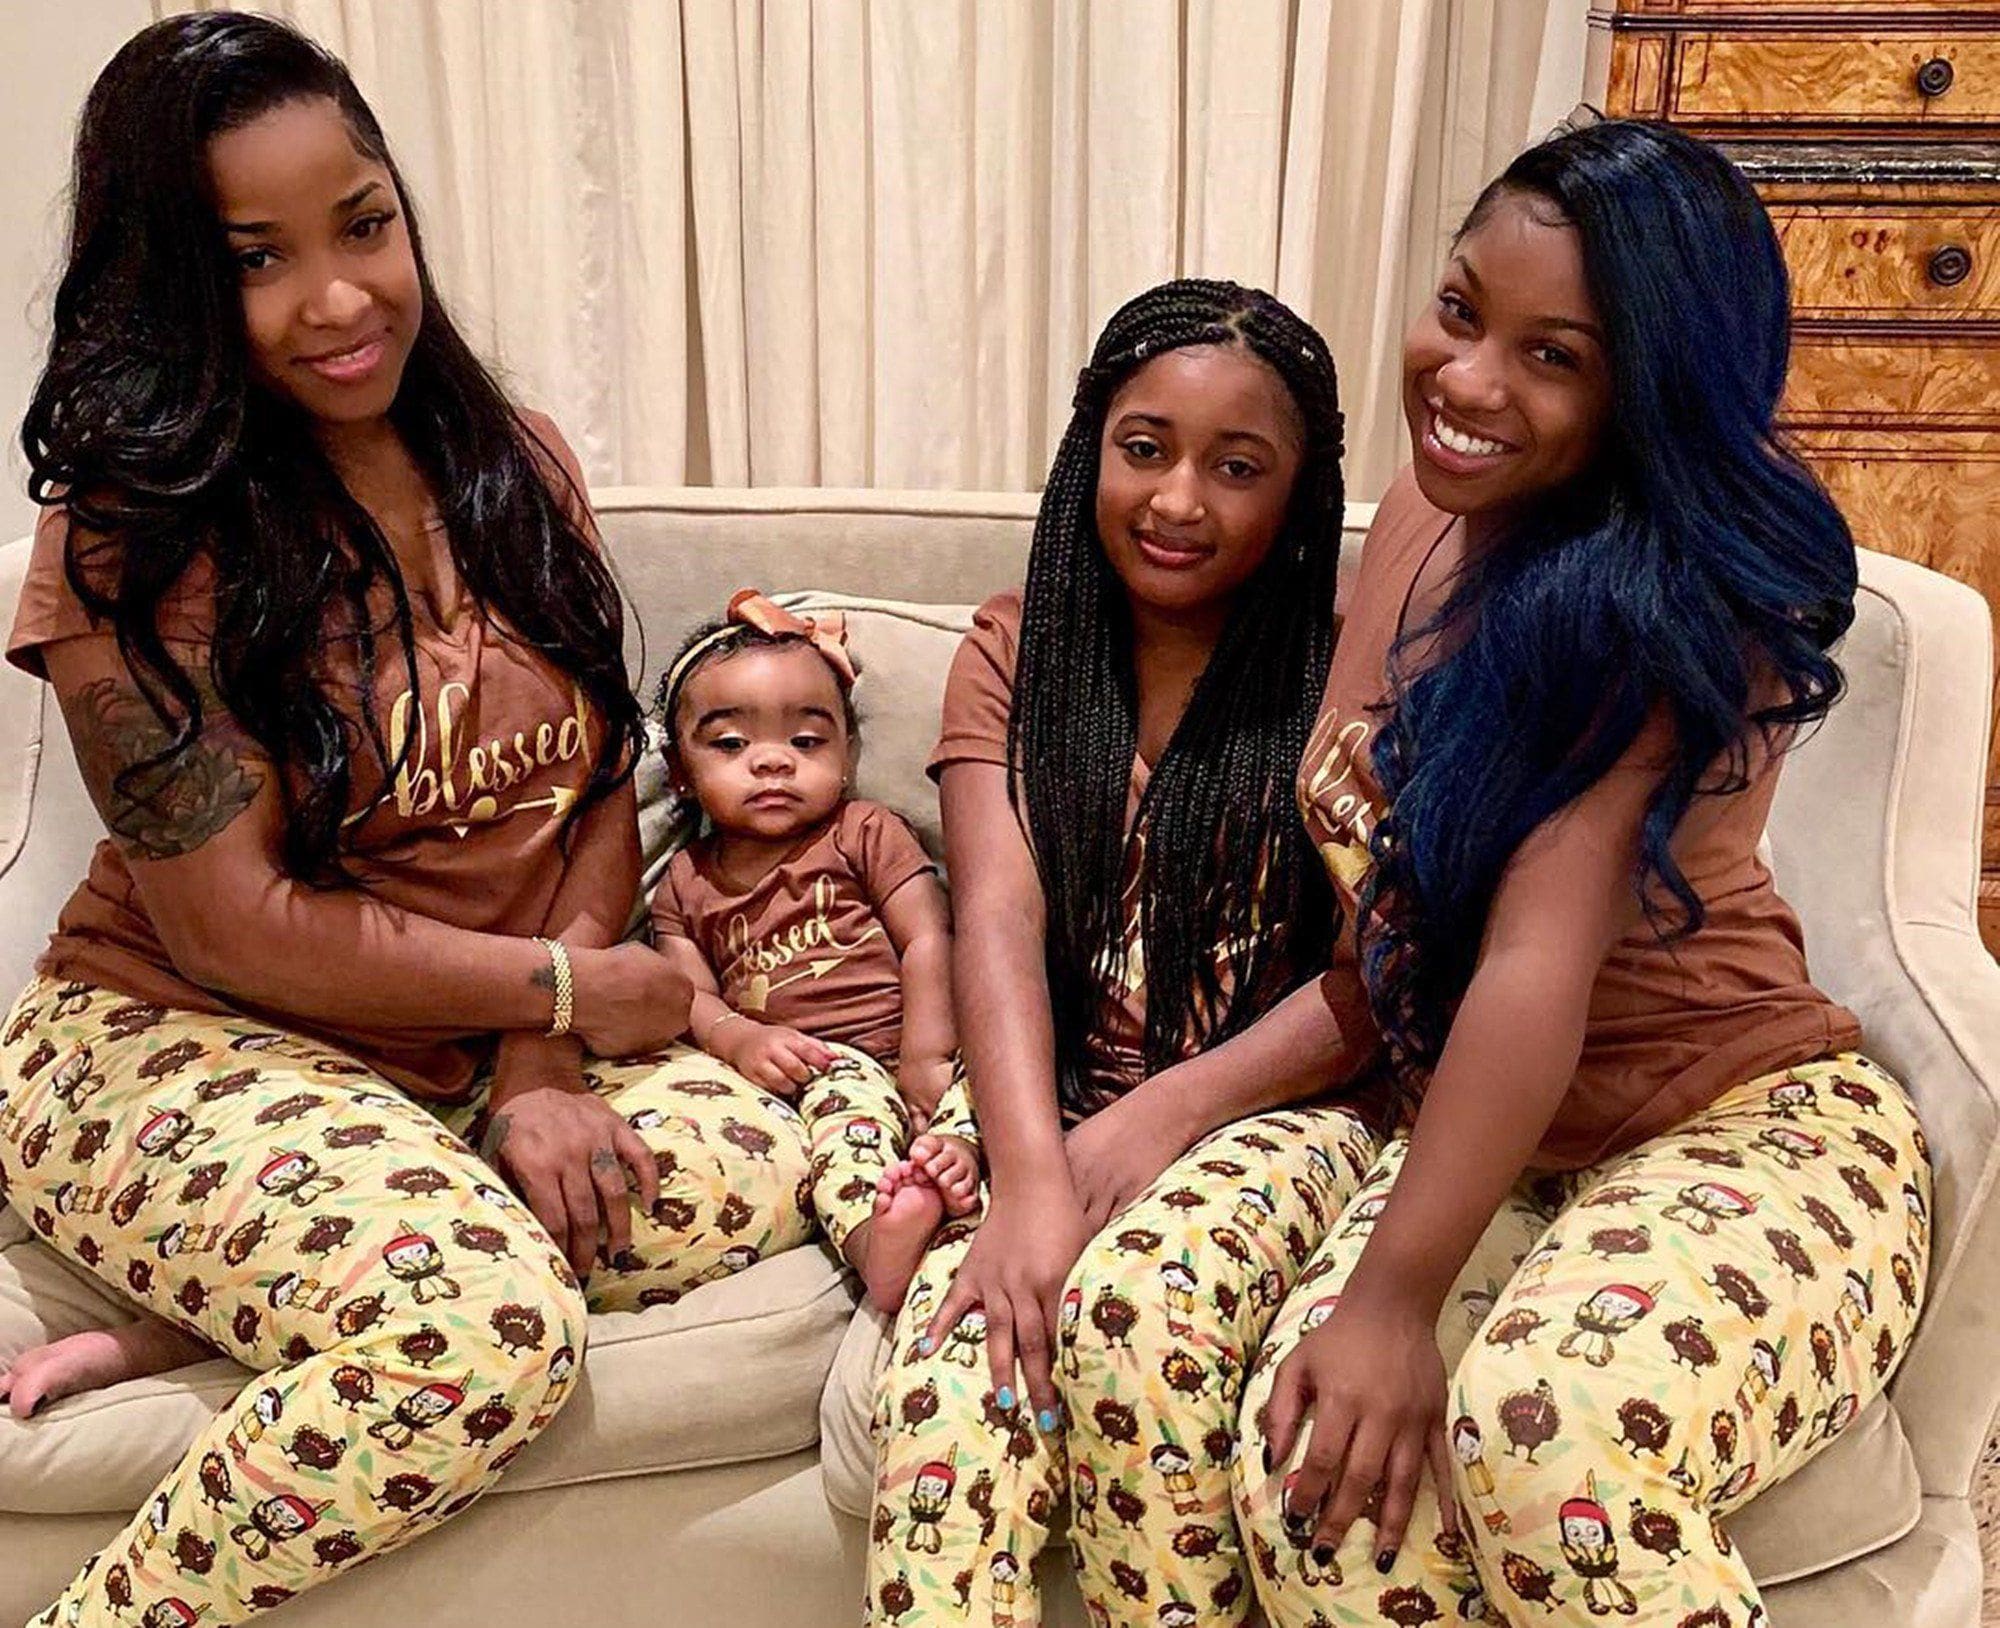 Toya Johnson Gushes Over Her Niece, Jashae And Her Daughter, Reginae Carter - Check Out The Girls Doing The Double Dutch